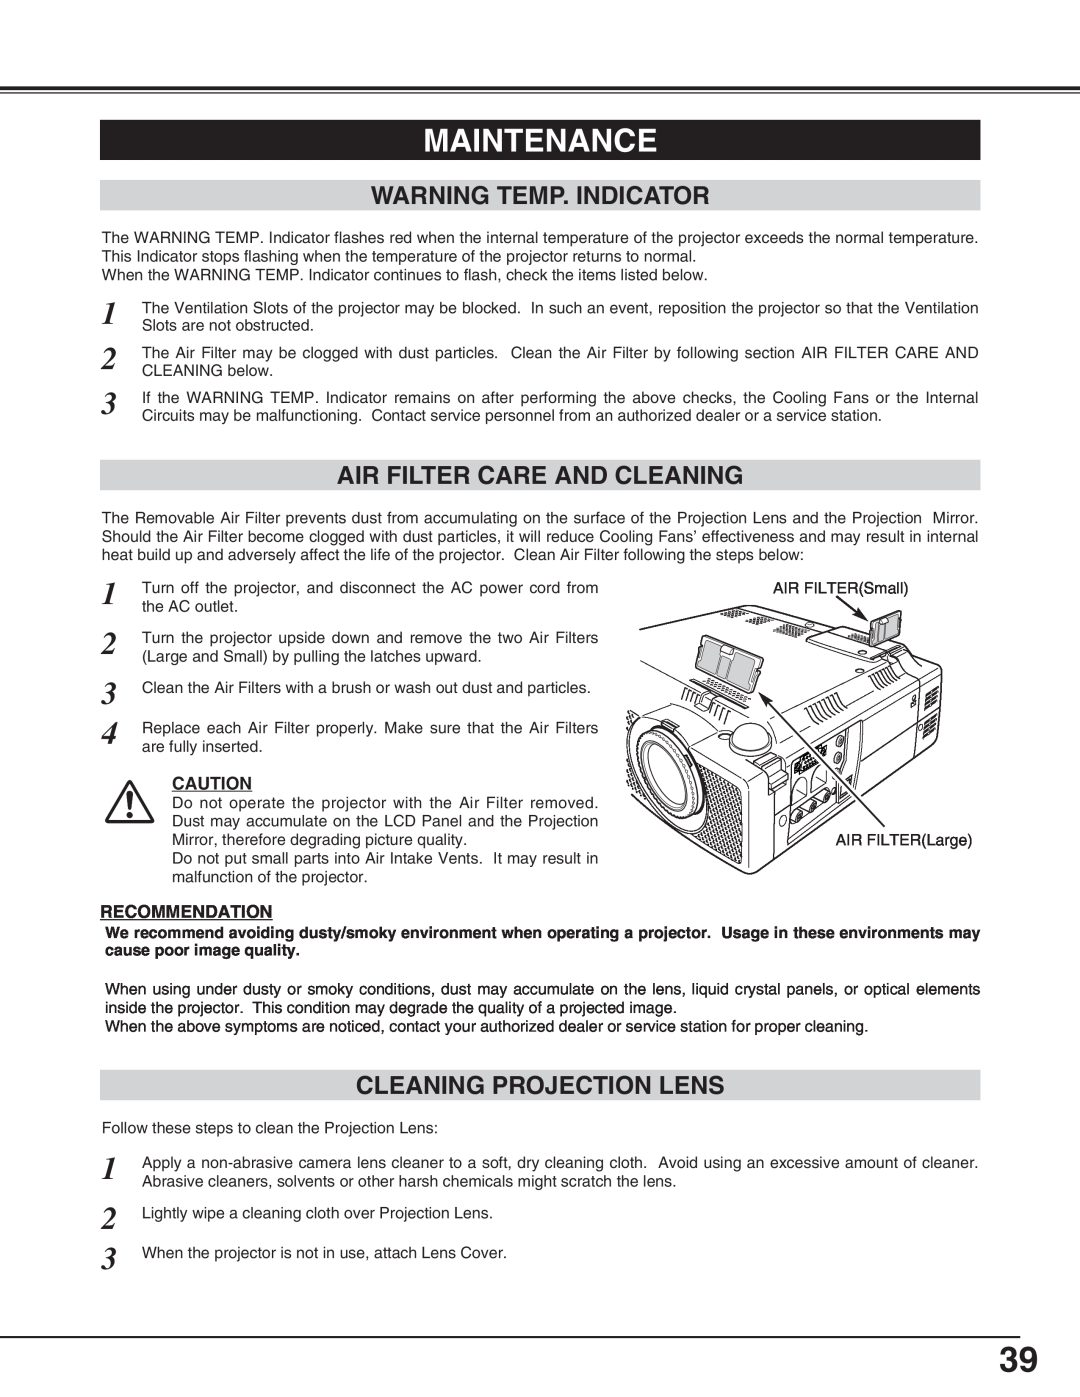 Canon LV-X2 owner manual Maintenance, Warning Temp. Indicator, Air Filter Care And Cleaning, Cleaning Projection Lens 